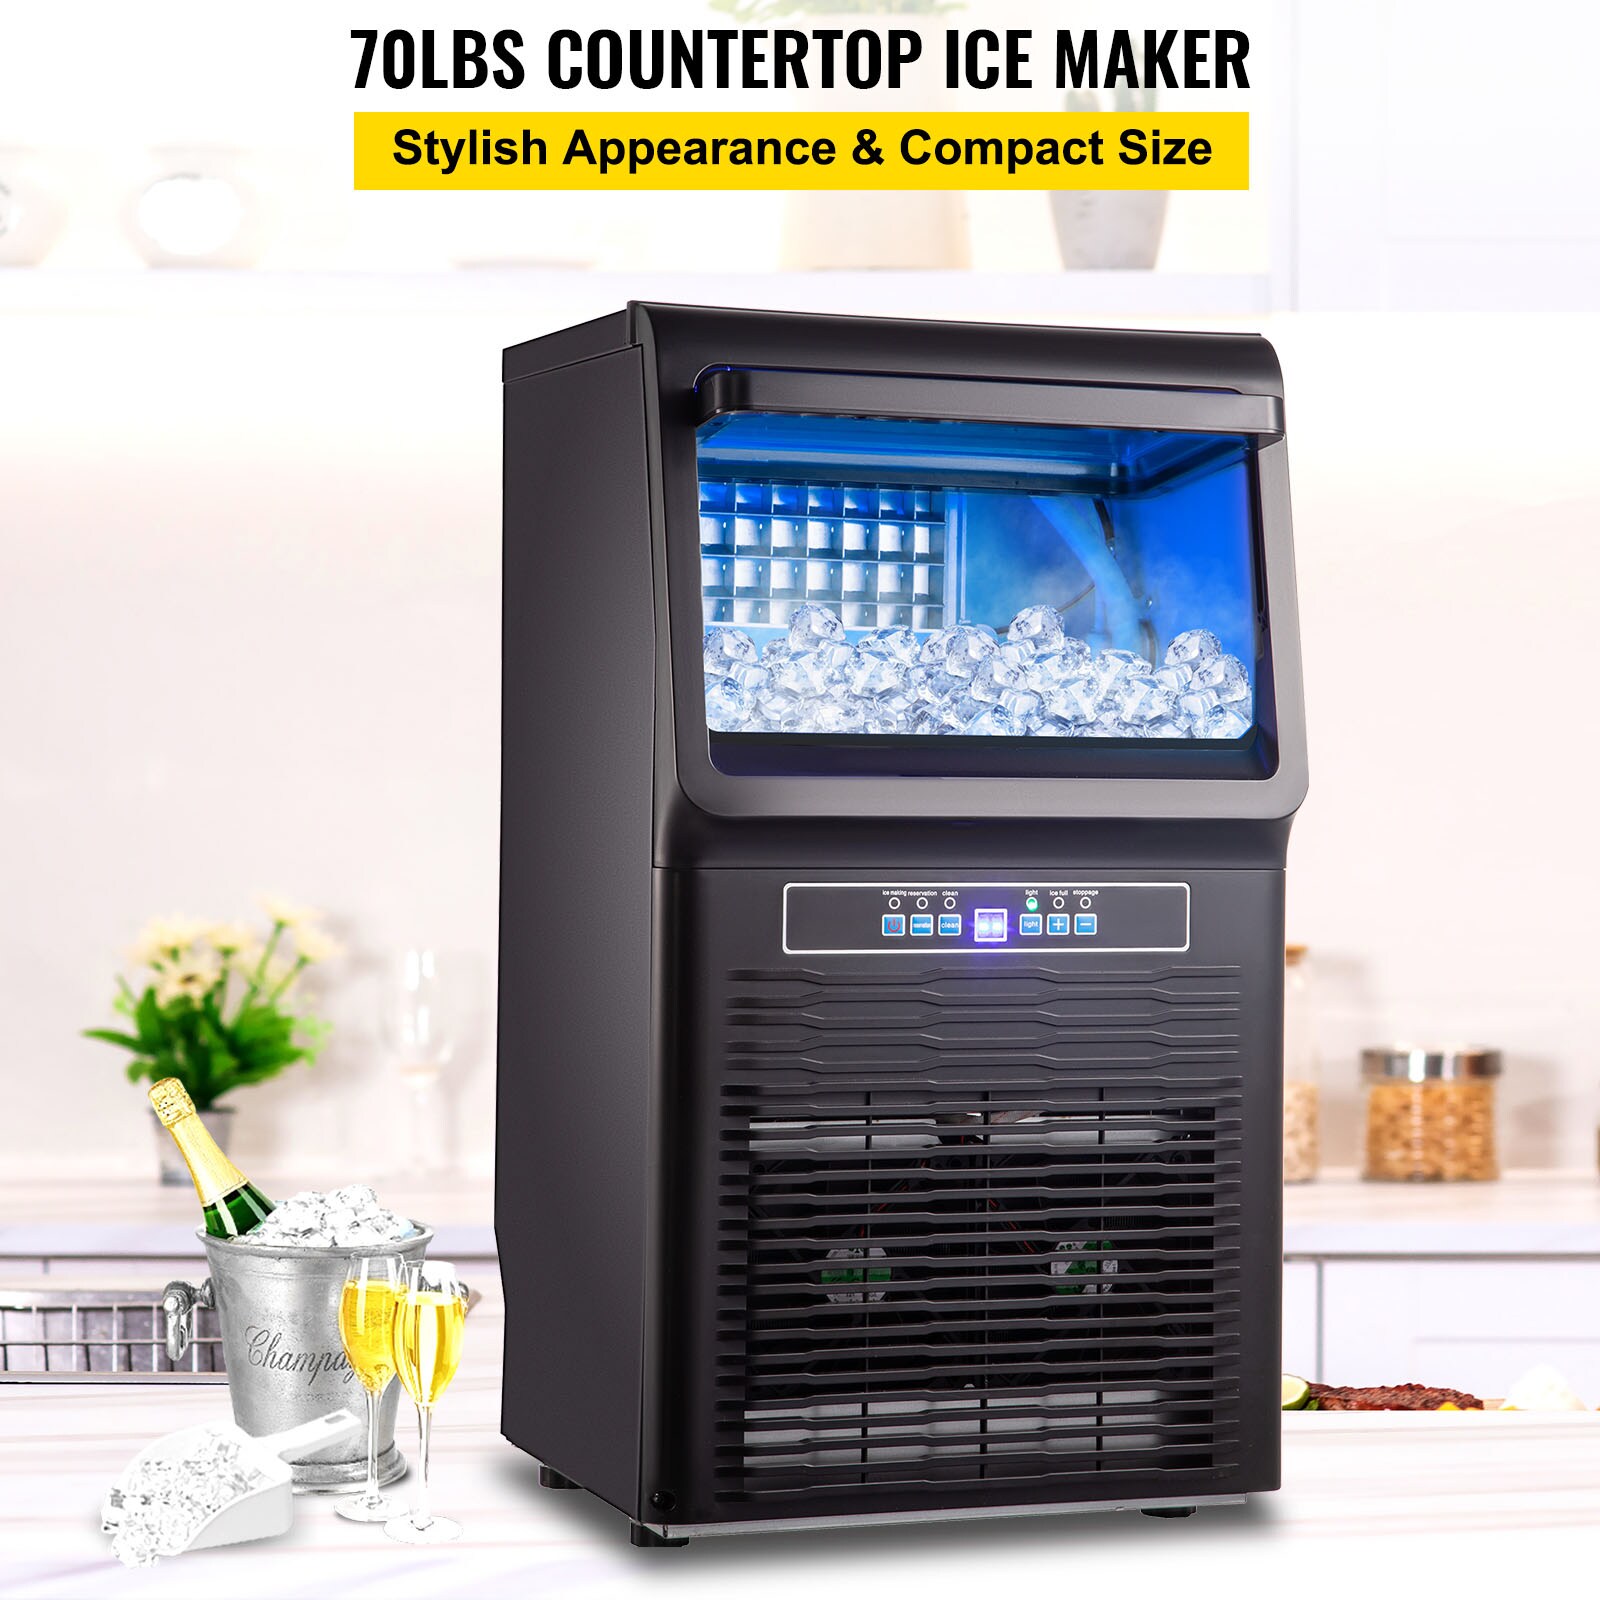 VEVOR Countertop Ice Maker 26 lb. / 24H Self-Cleaning Portable Ice Maker  Stainless Steel Ice Machine, Silver ZDBTMSZB26LBSBP0JV1 - The Home Depot